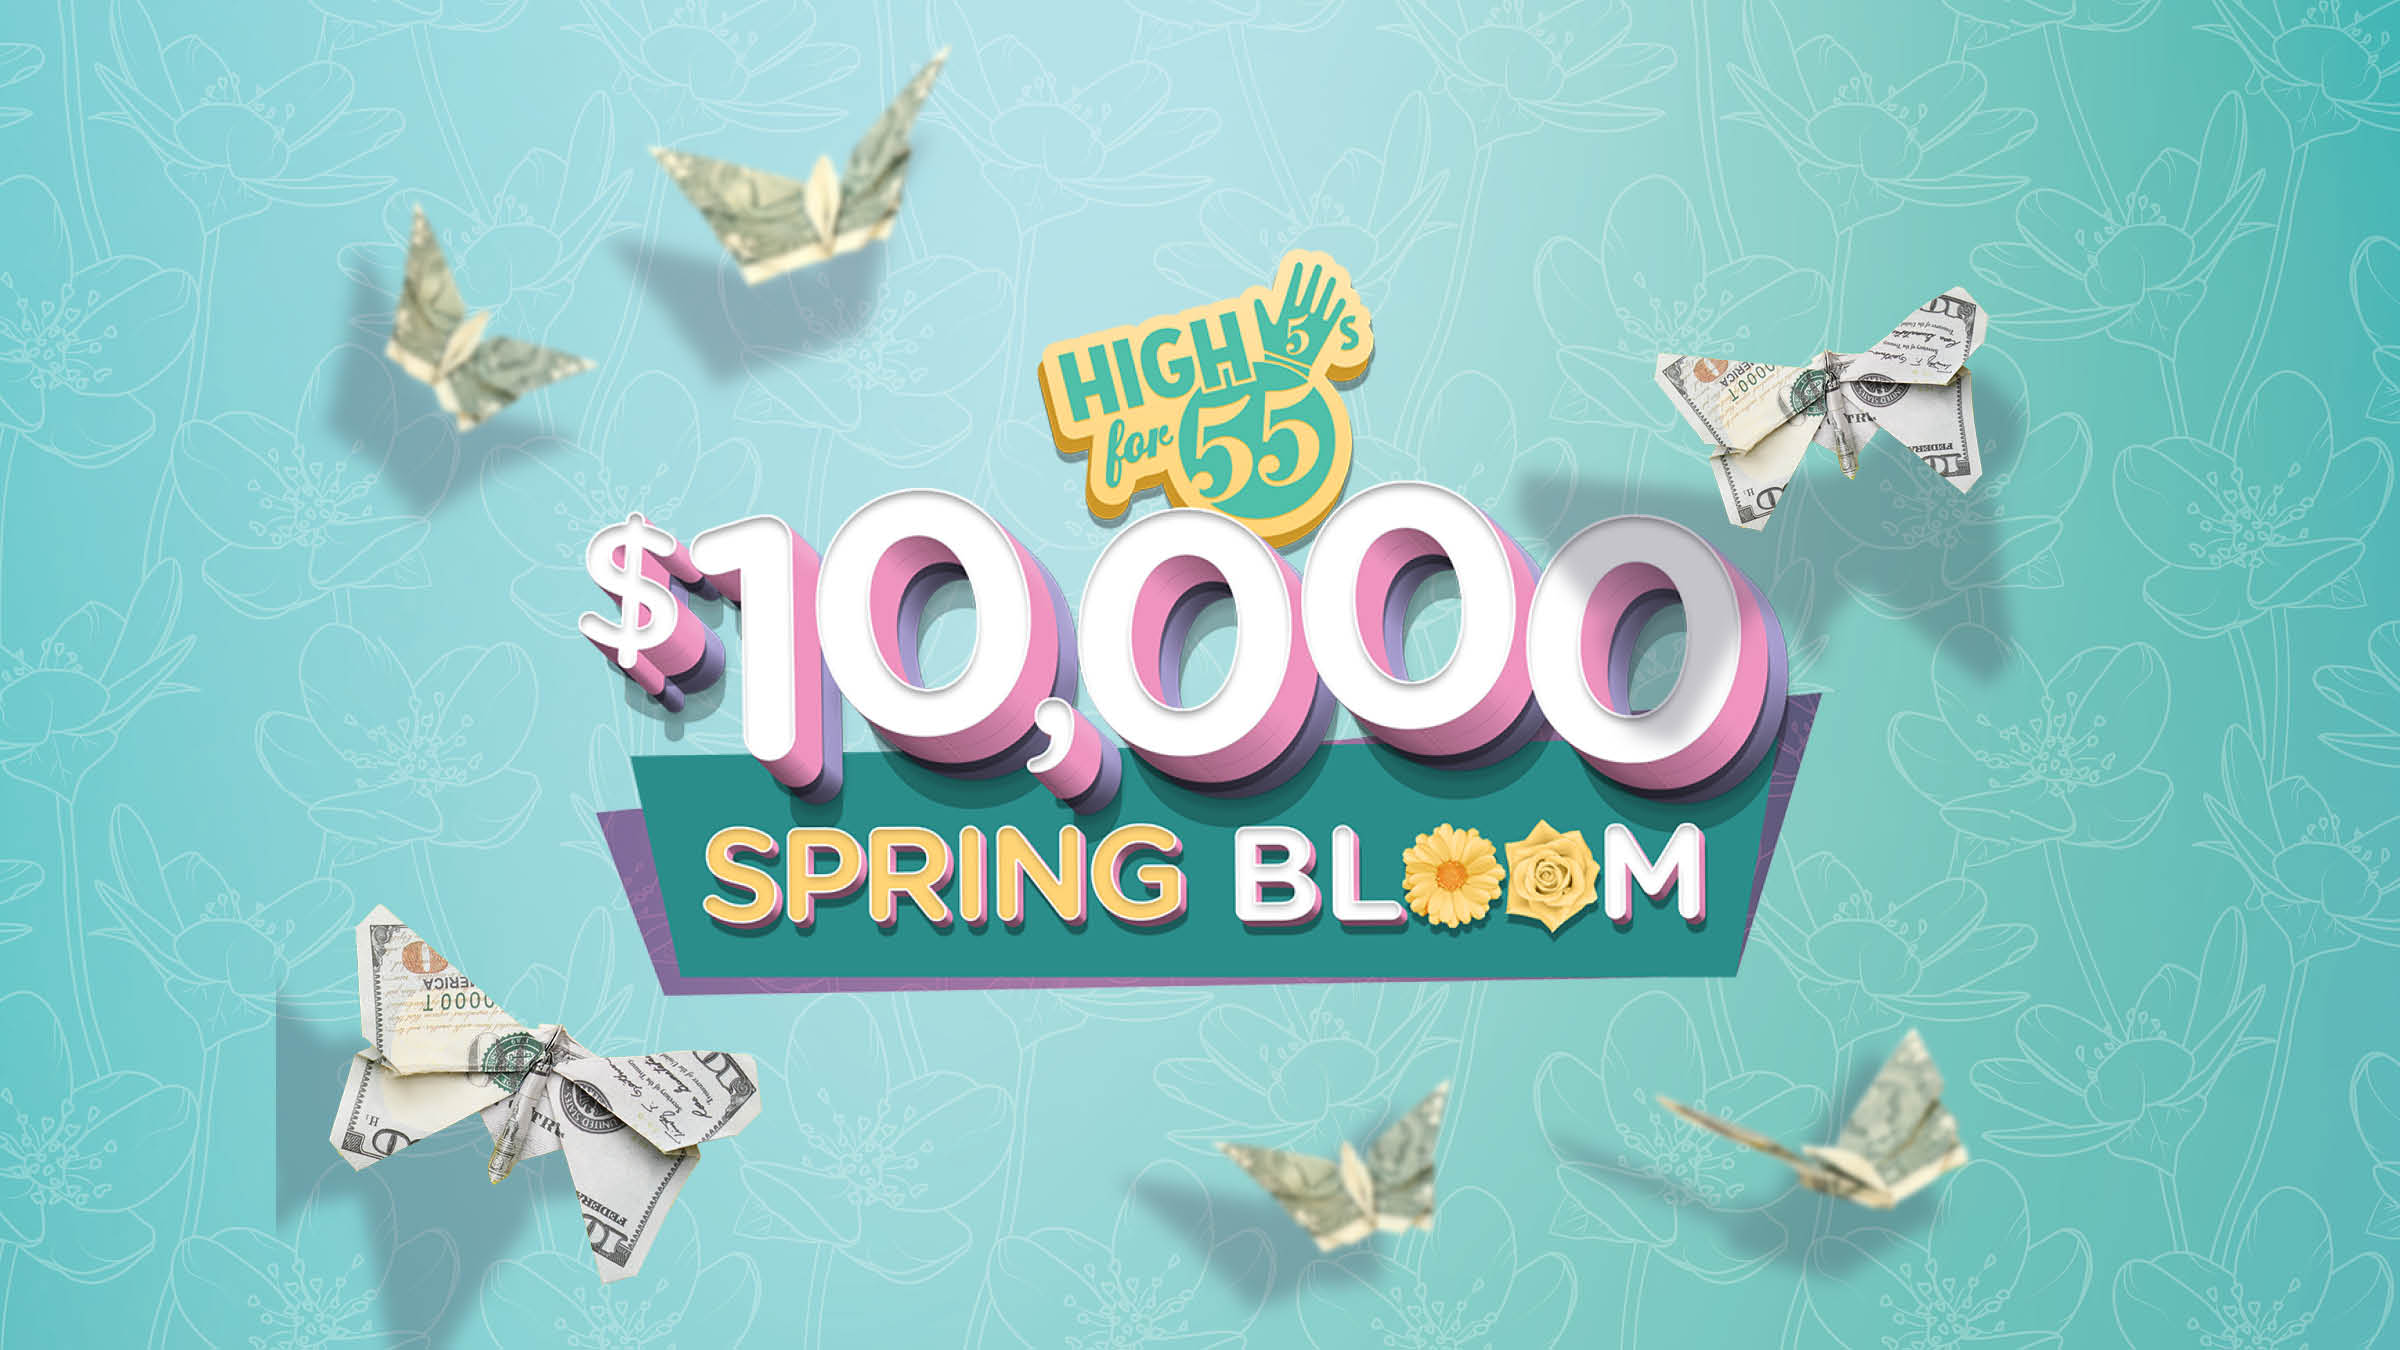 High 5s for 55's - $10,000 Spring Bloom